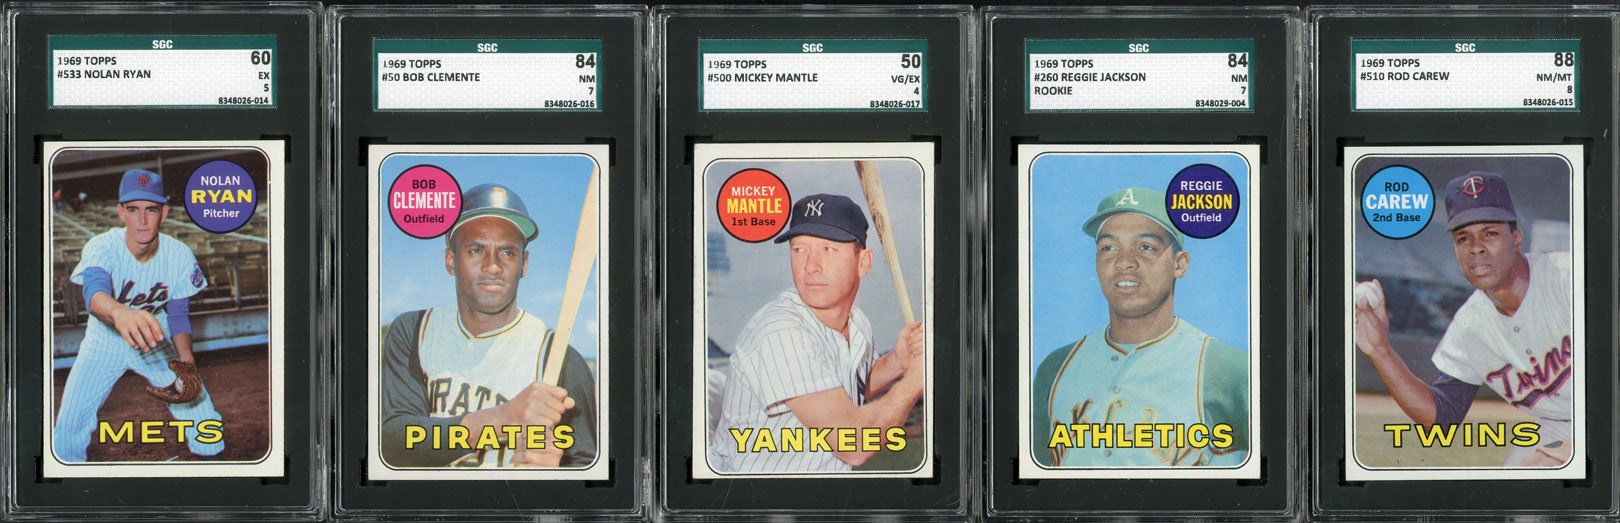 1969 Topps HIGH GRADE Complete Set (664 Cards - 5 SGC Graded)